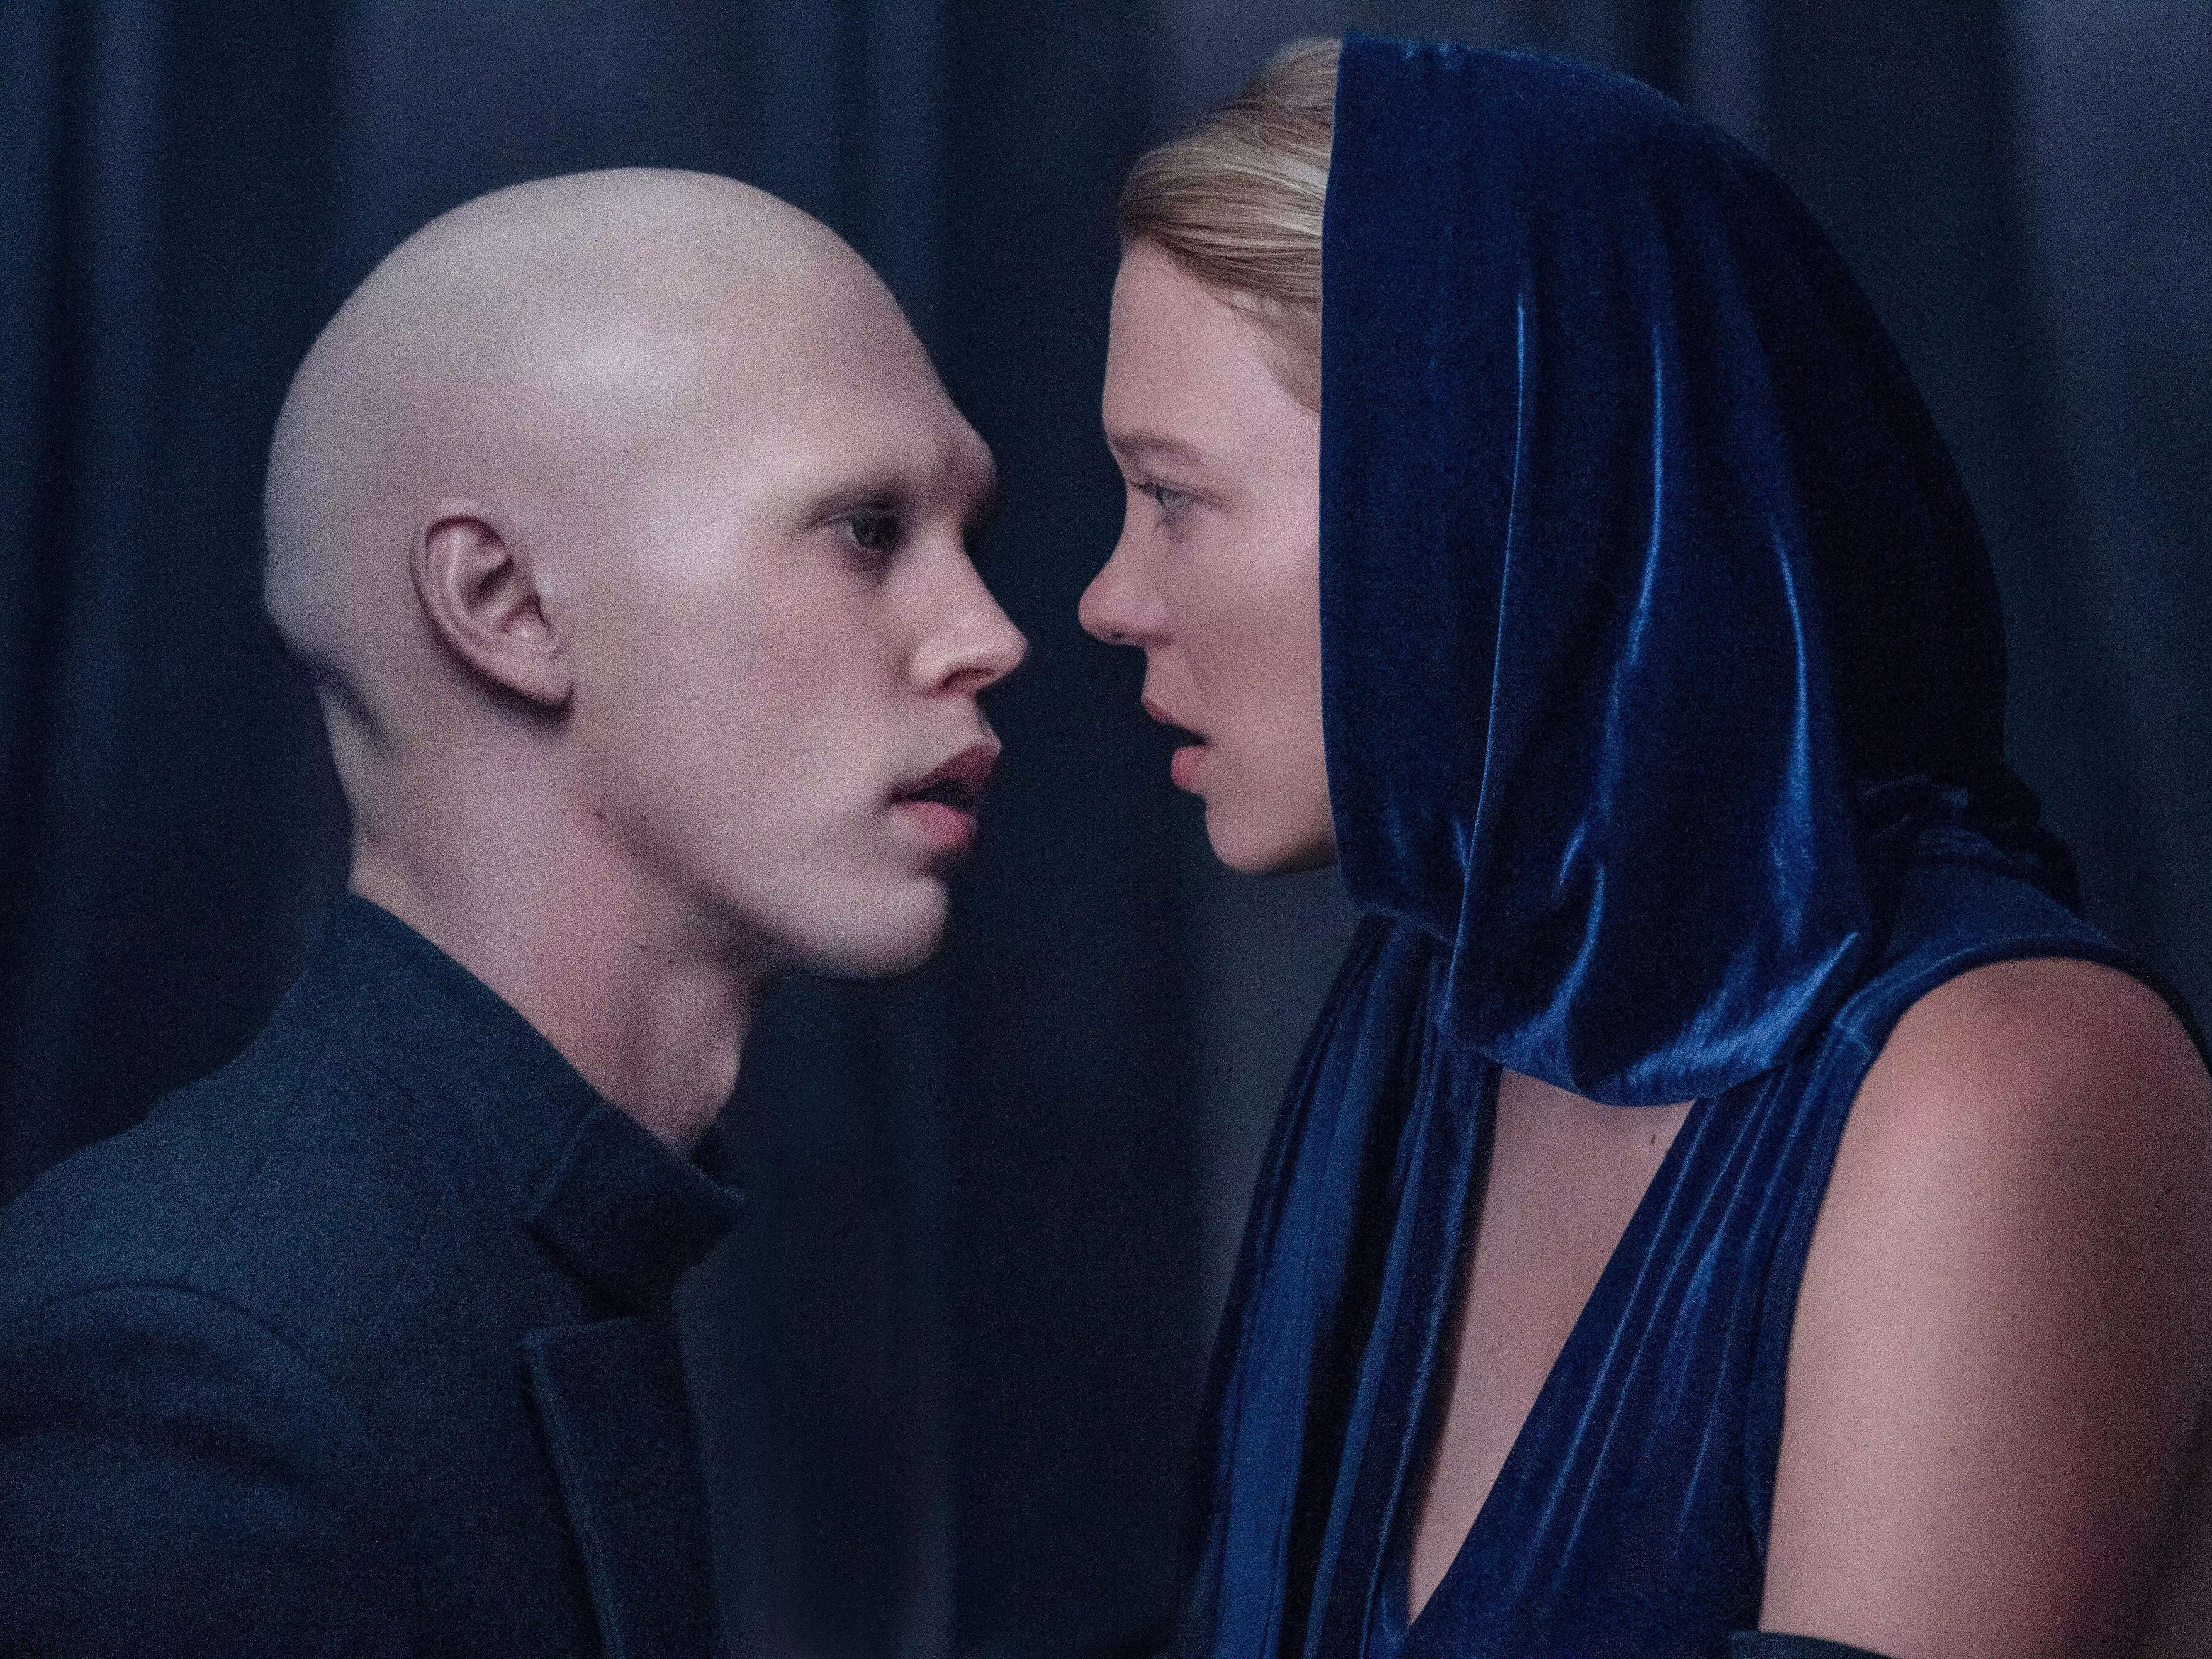 austin butler and lea seydoux in dune. butler as feyd-rautha is extremely bald, wearing a black high-collar jacket. seydoux as lady margot is wearing a blue velvet dress, with some fabric draped above her head